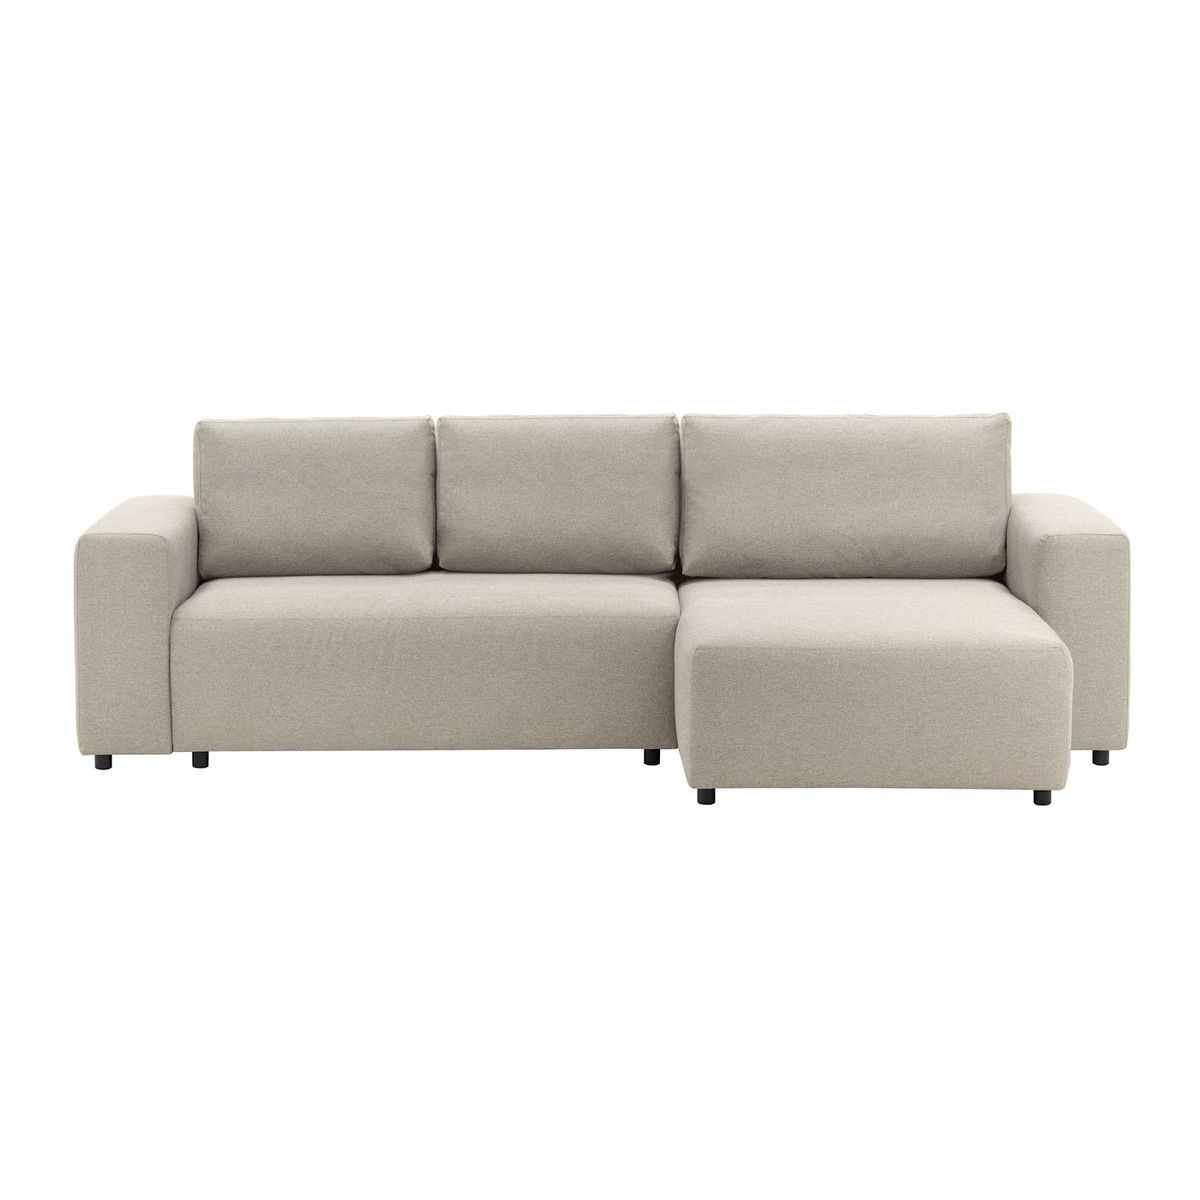 Solace Right Hand Corner Sofa Bed, beige - image 1